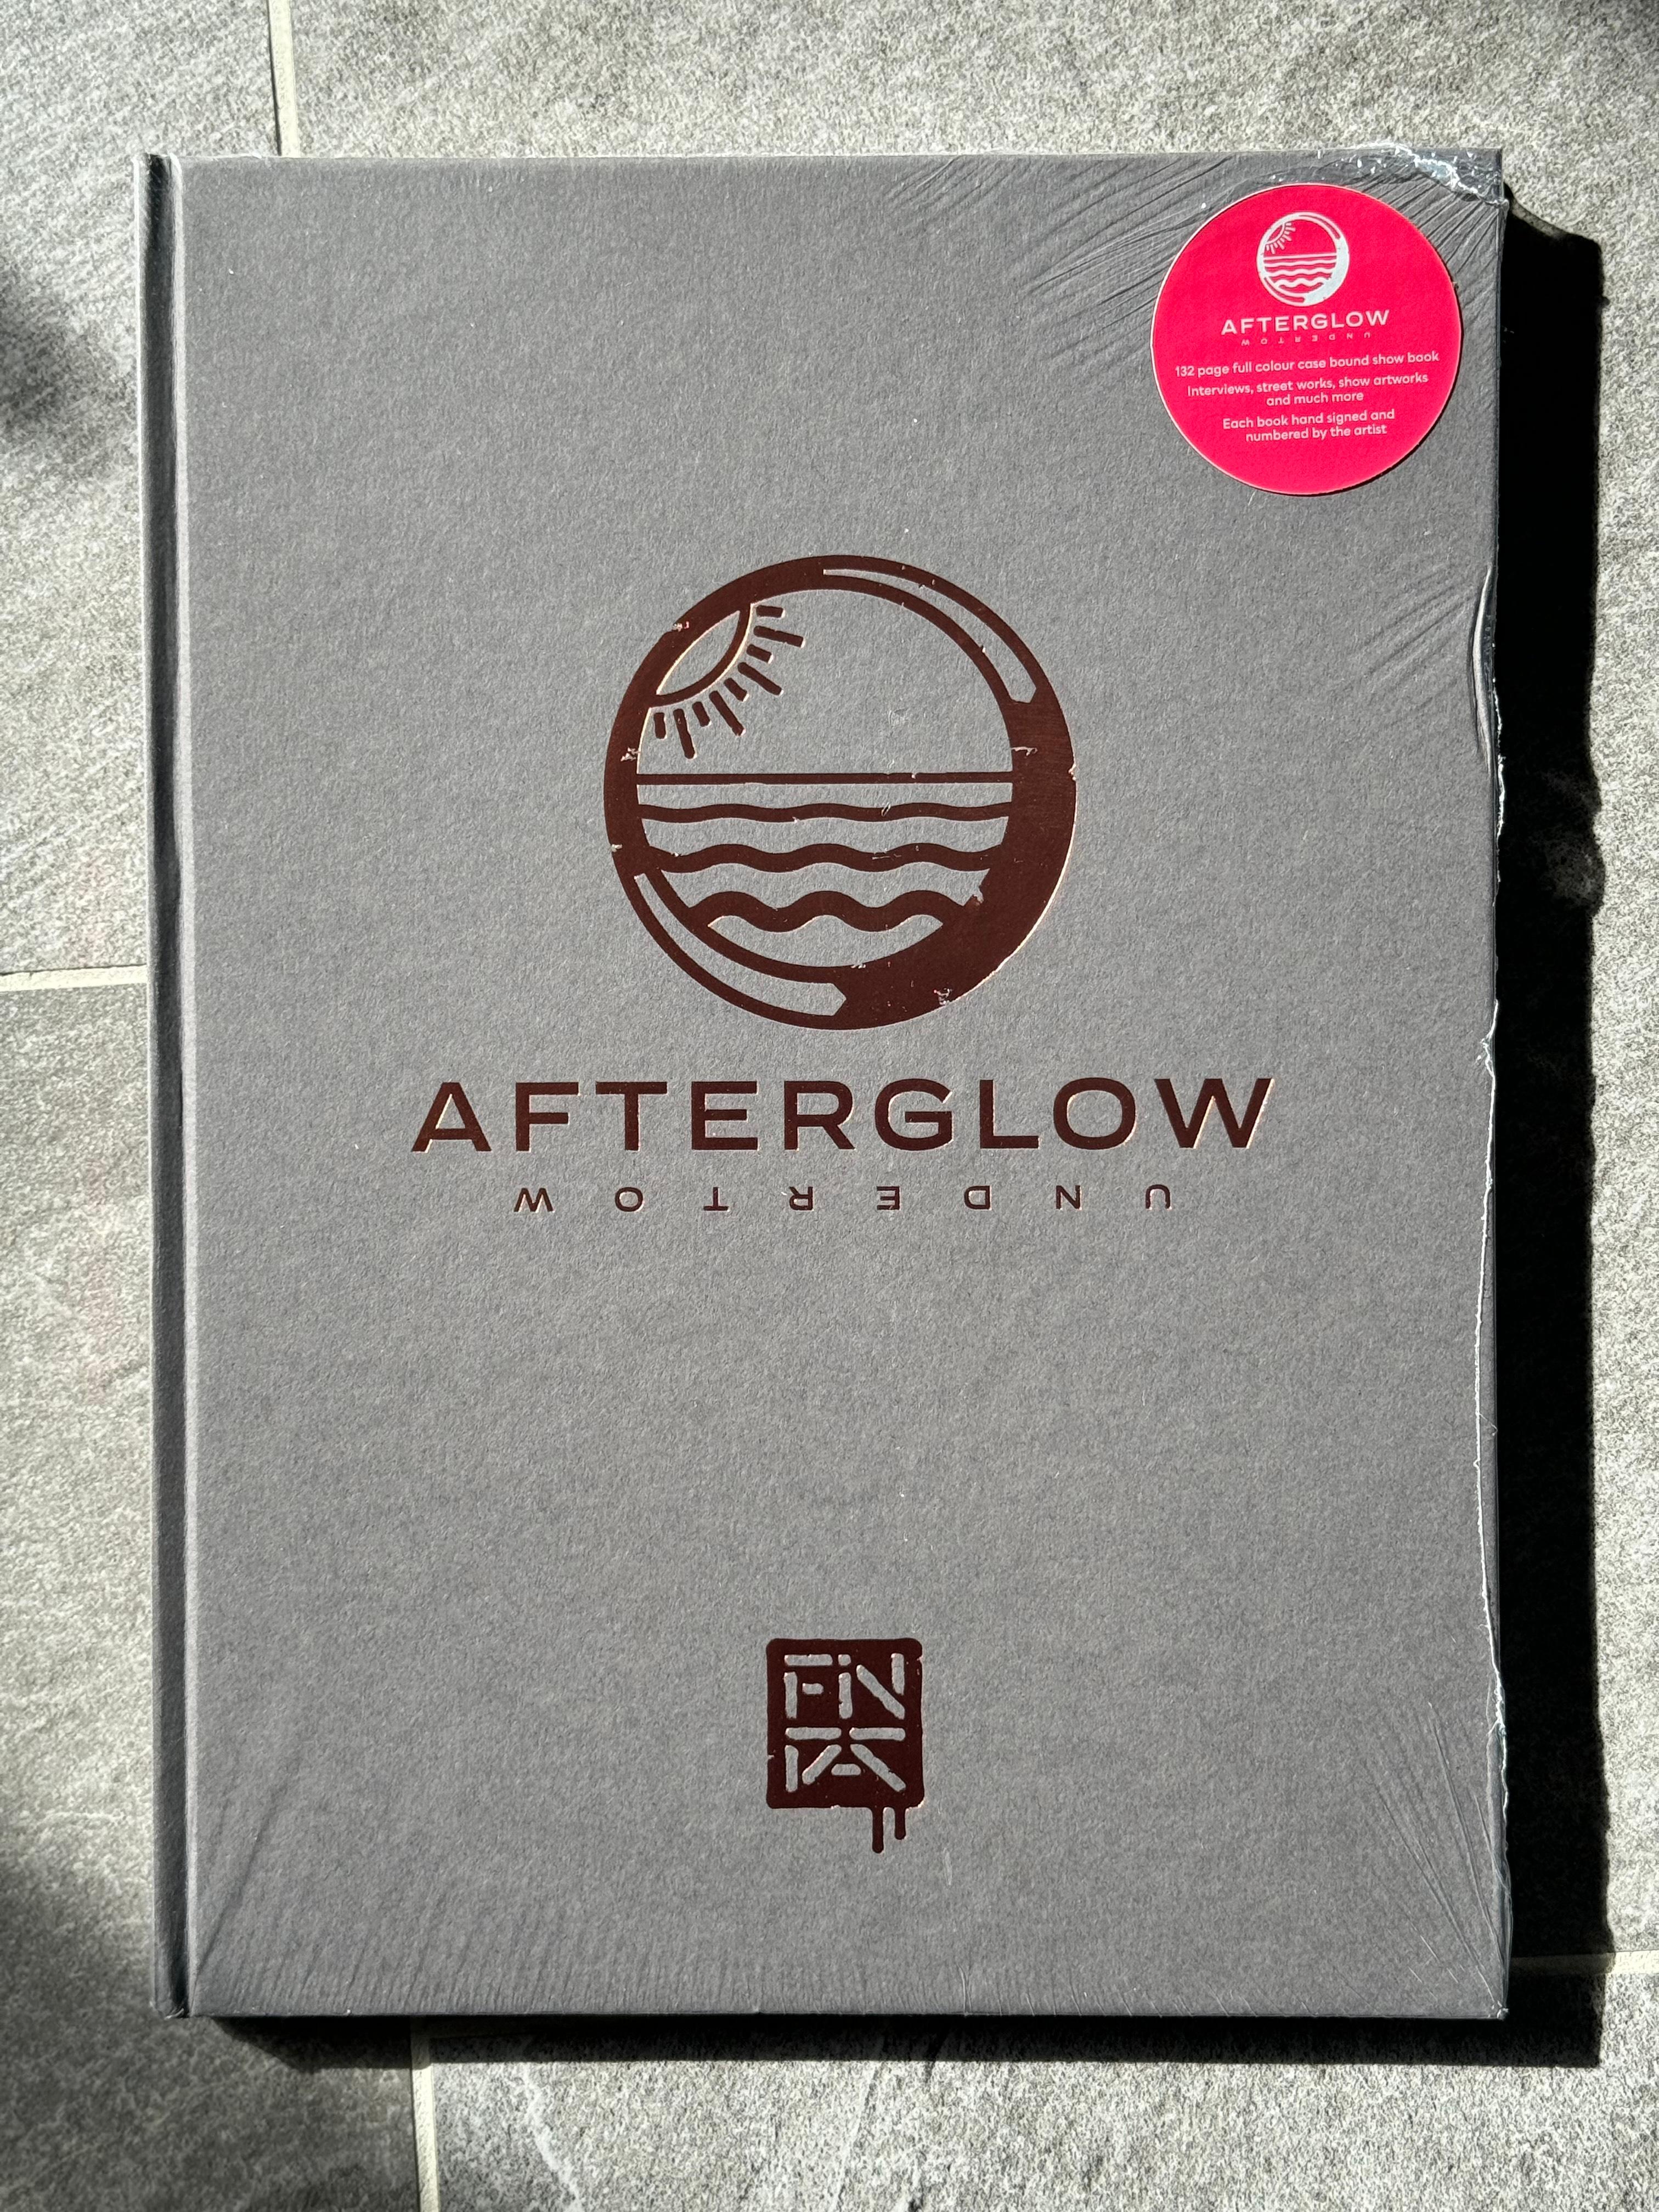 Afterglow Undertow Limited Edition Catalogue Book Edition of 300 - Print by Fin DAC